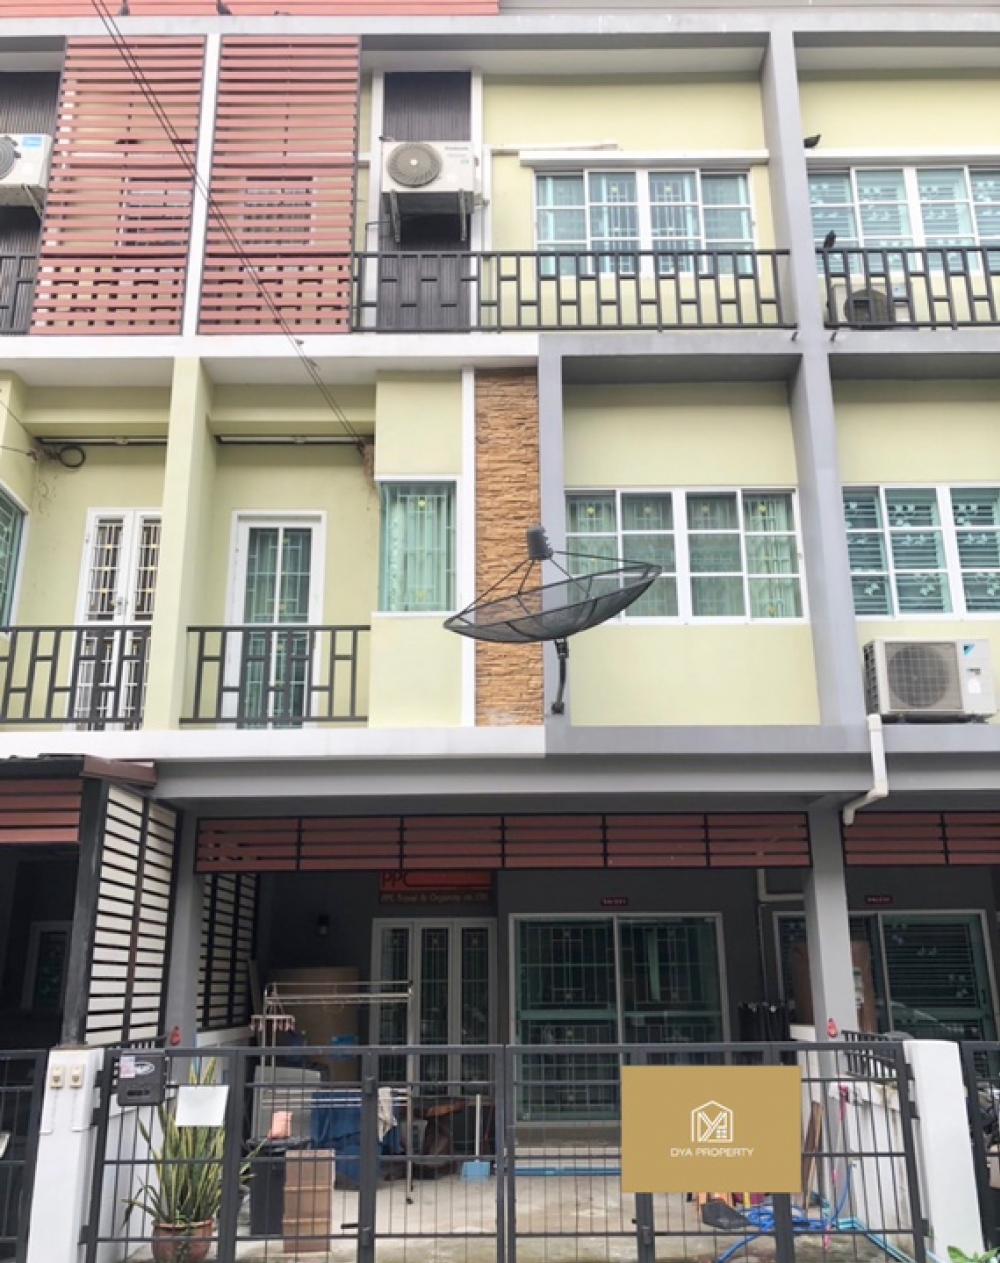 For RentTownhouseNonthaburi, Bang Yai, Bangbuathong : Available 15/5/67 Townhome for rent, 3 floors, 4 bedrooms, 4 bathrooms, 2 air conditioners, Buathong Thani Parkville 5, pets allowed 🐶